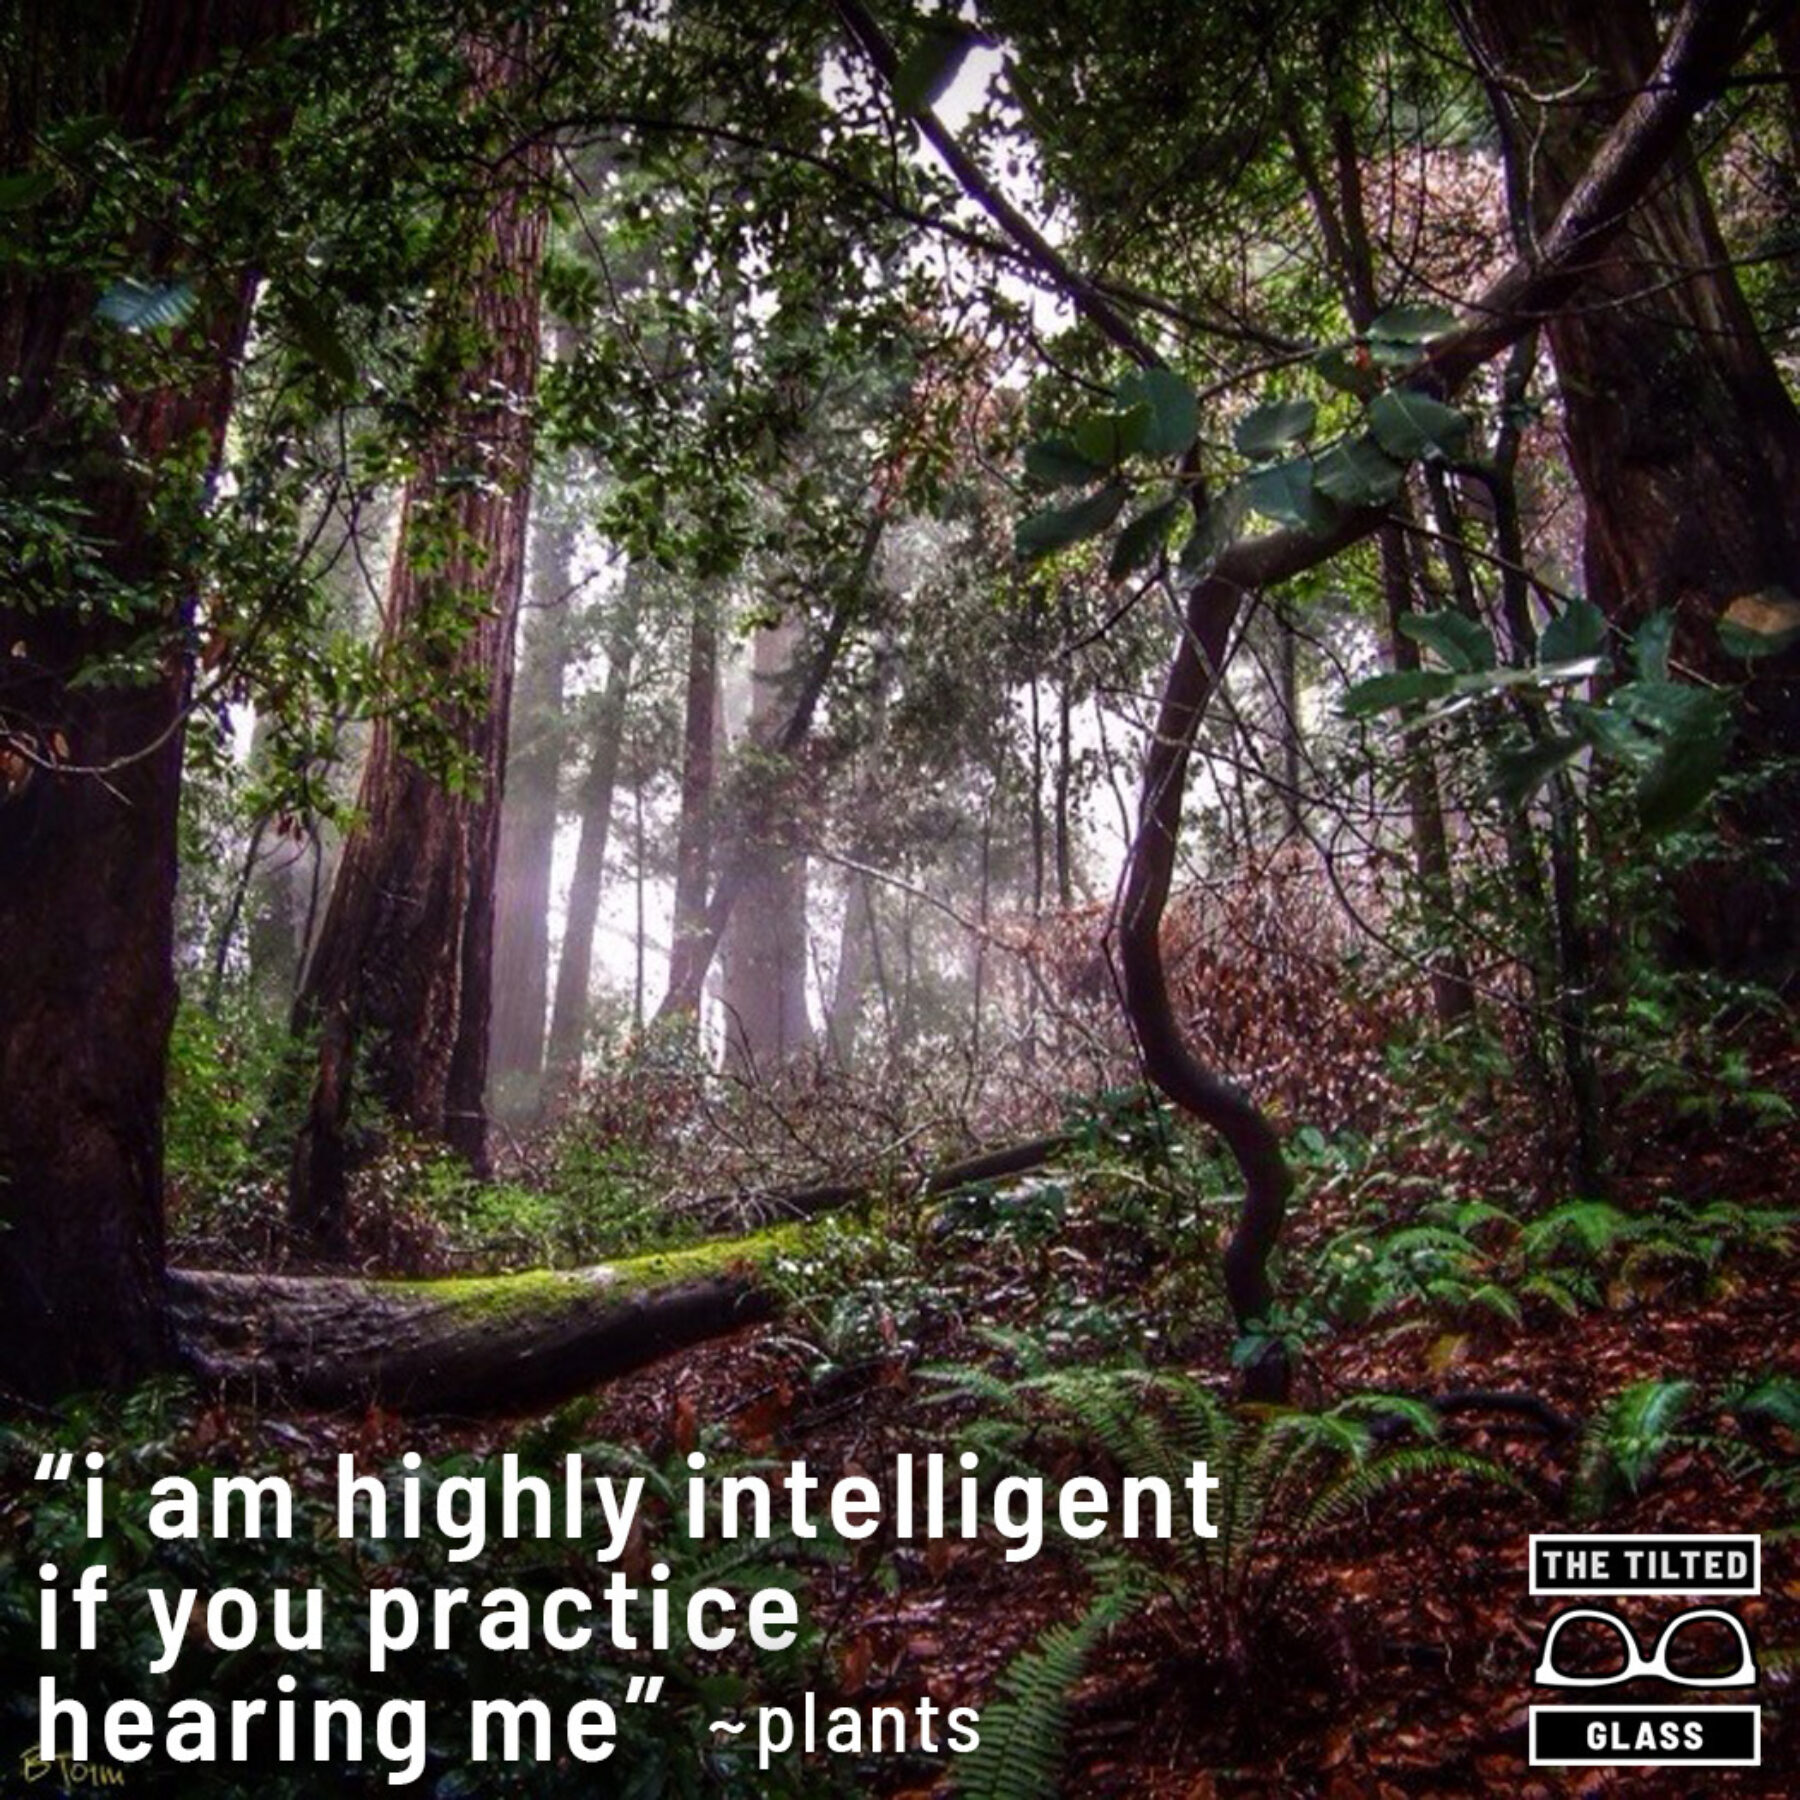 I am highly intelligent if you practice hearing me ~ plants